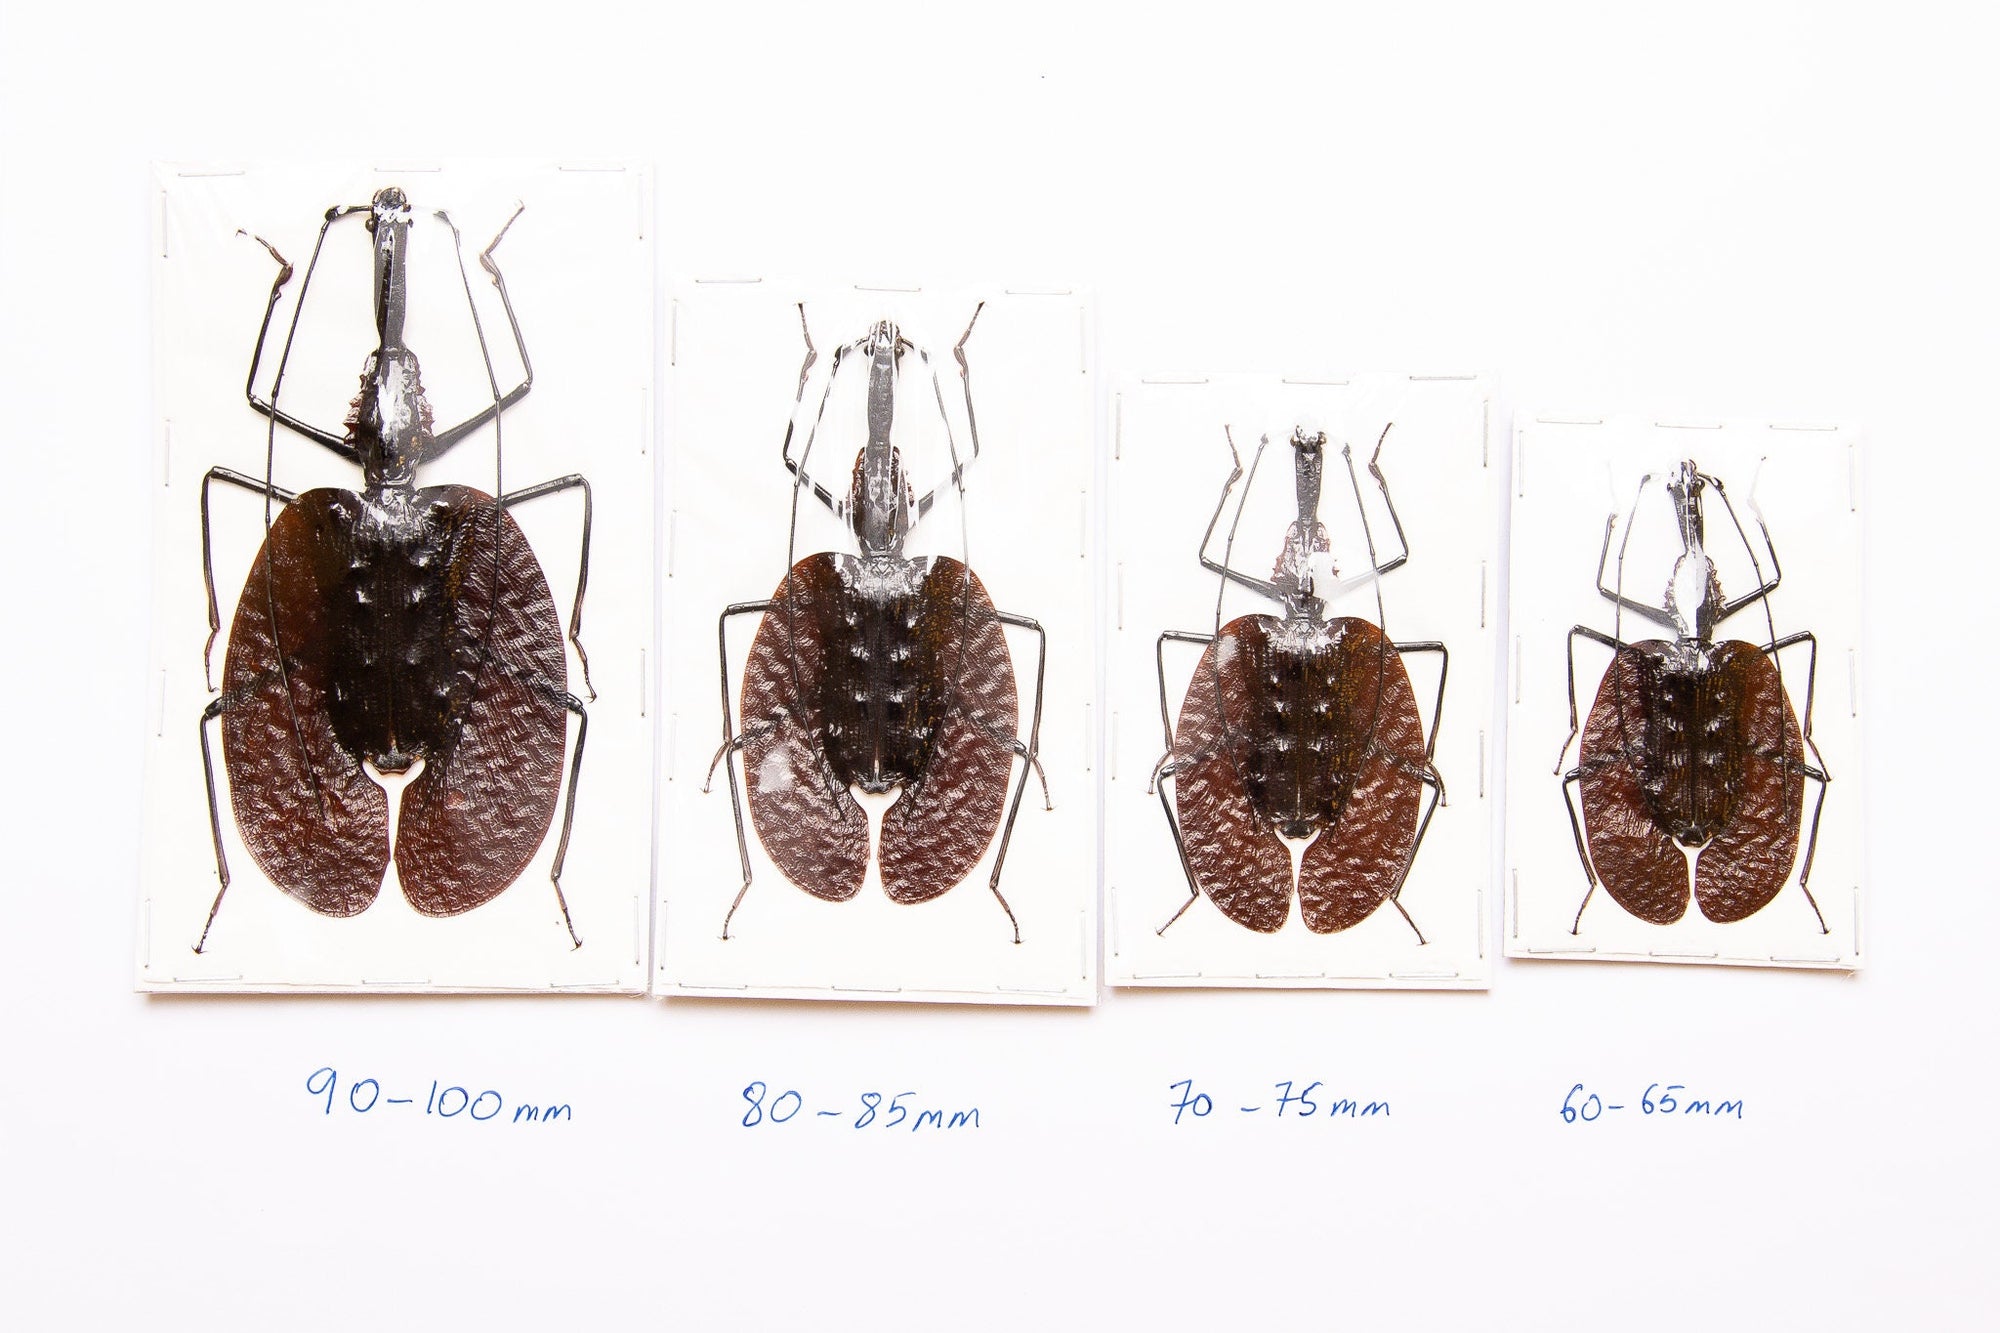 Violin Beetles (Choise of 4 sizes) Mormolyce phyllodes, A1 Real Entomology Specimens